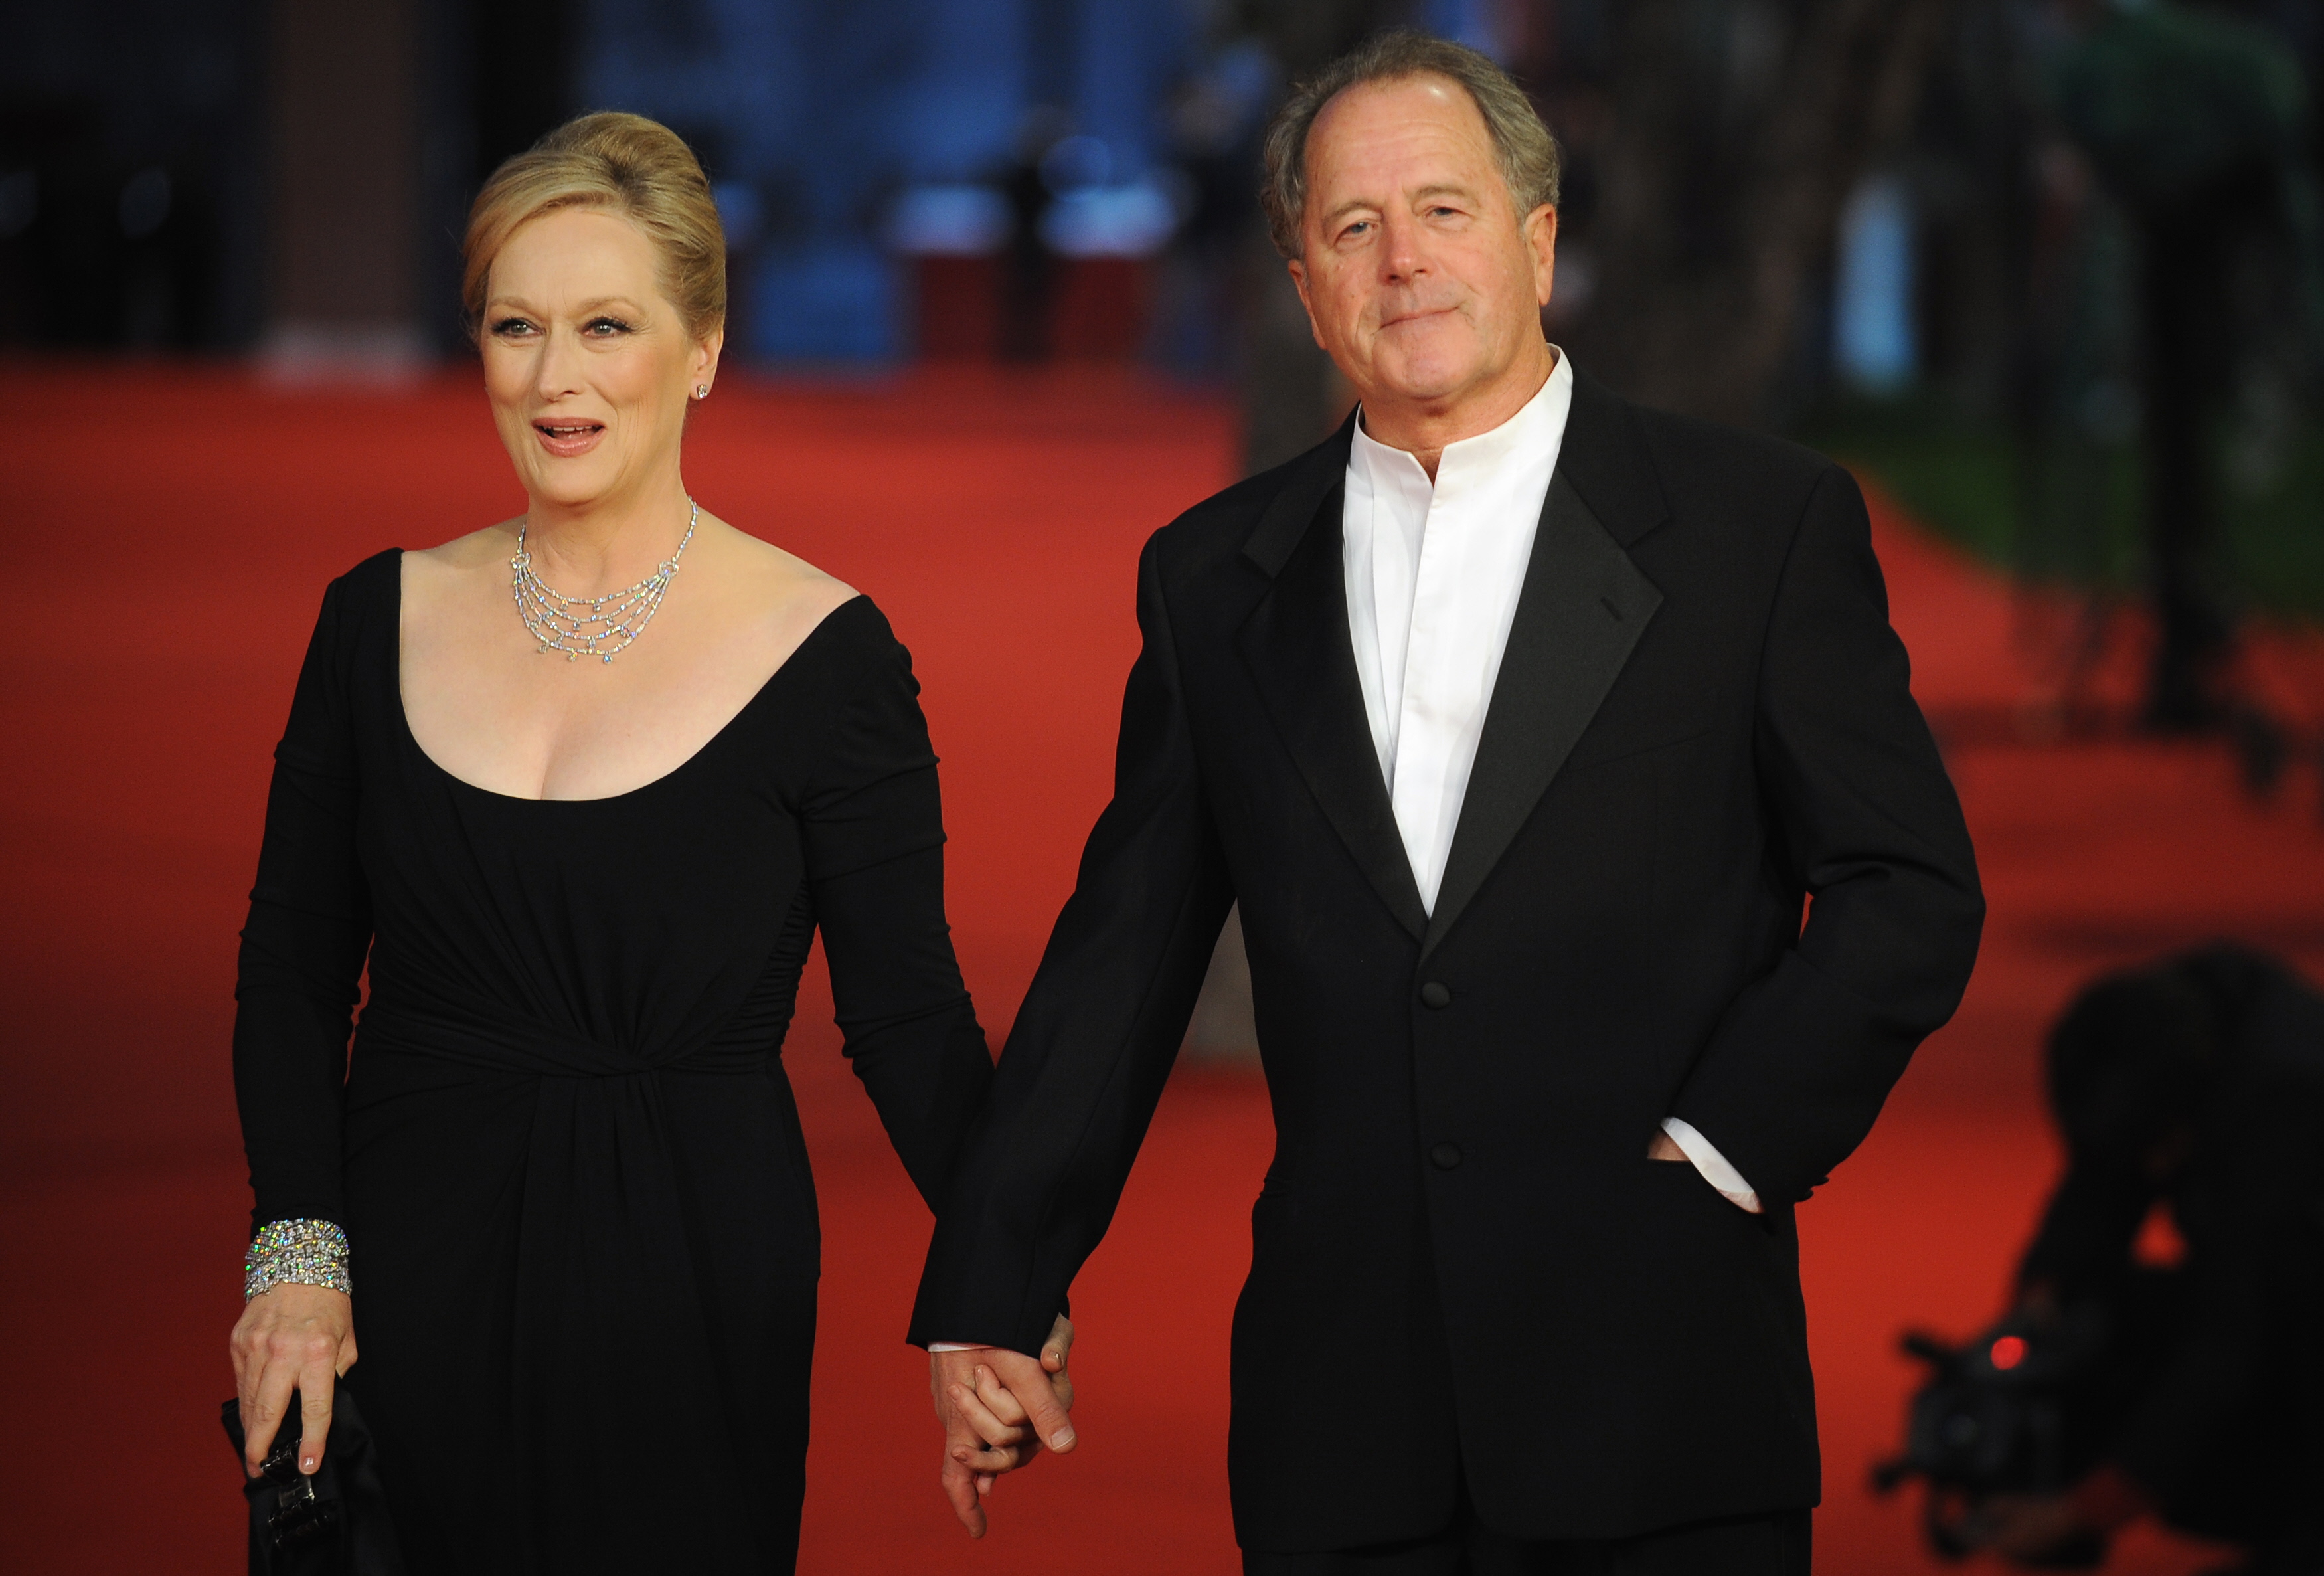 Meryl Streep and Don Gummer on the red carpet during the Rome Film Festival in Rome, Italy, on October 23, 2009 | Source: Getty Images